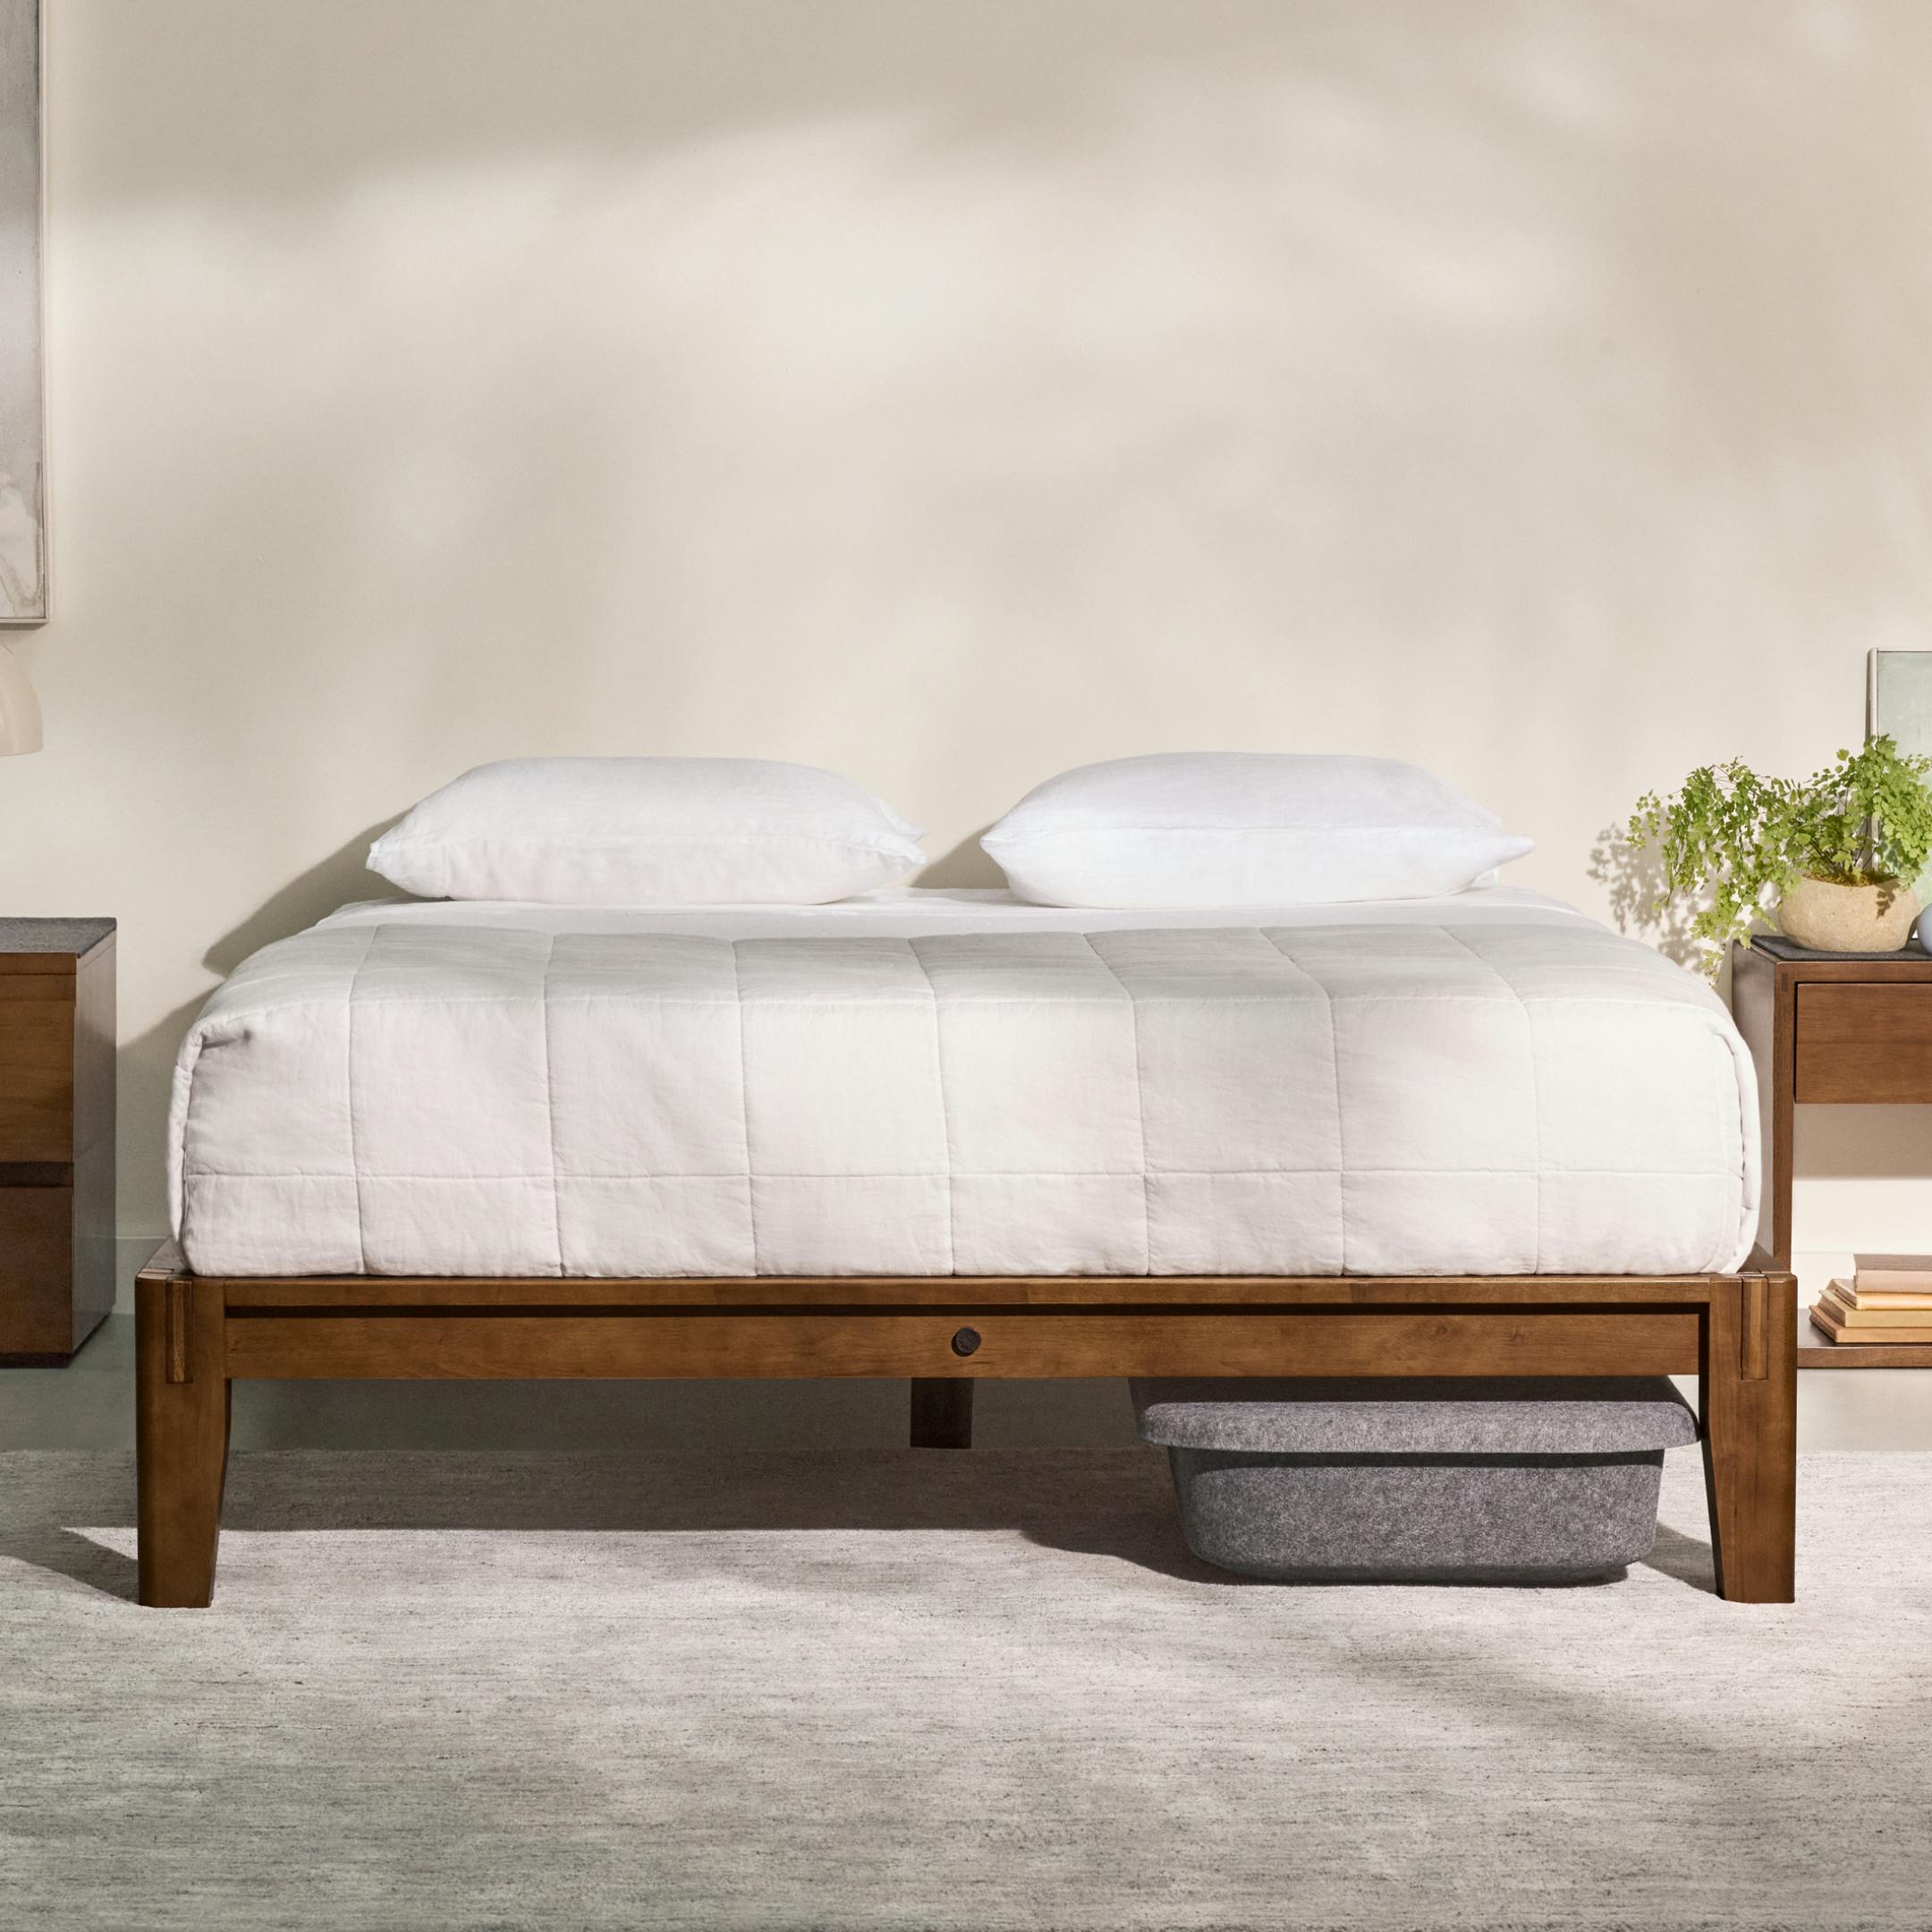 The Bed Frame only, in Walnut 9.12